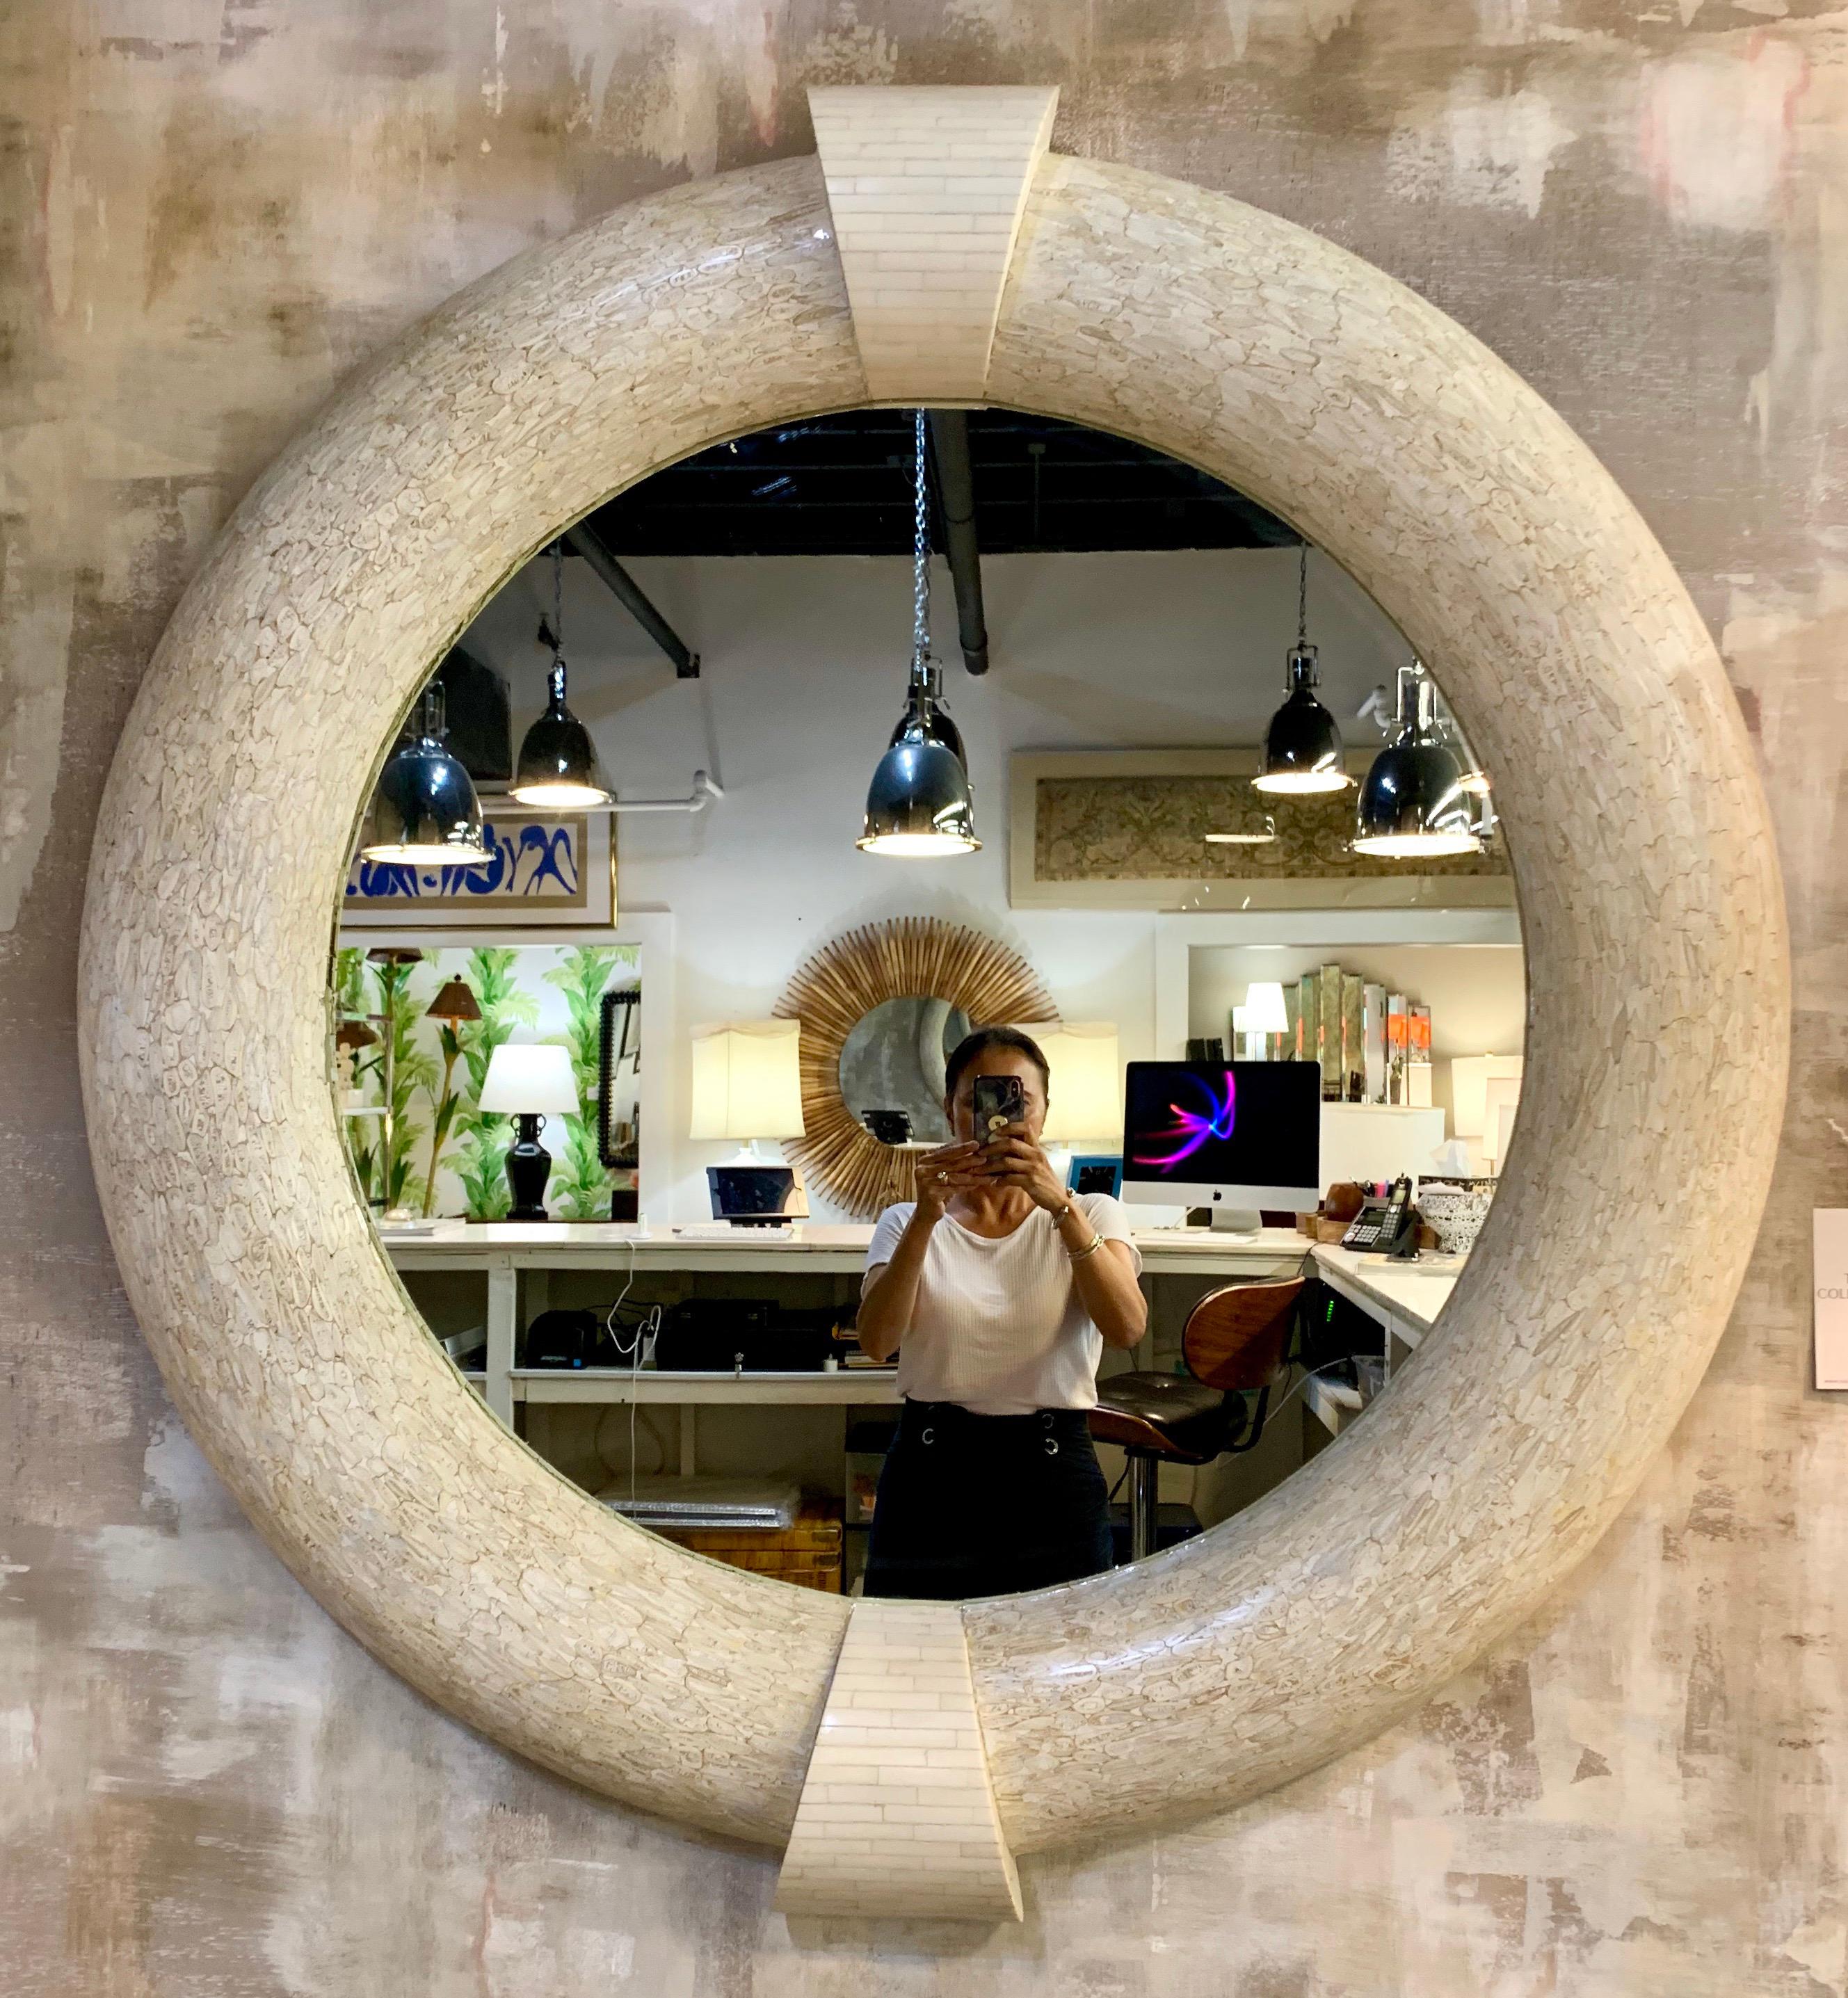 Stunning in its scale as well as craftsmanship. This fifty one inch diameter tessellated round mirror
looks like a work of art. The mosaic work is on point and it makes a great entry piece of art in your home
or workplace. The mirror is not